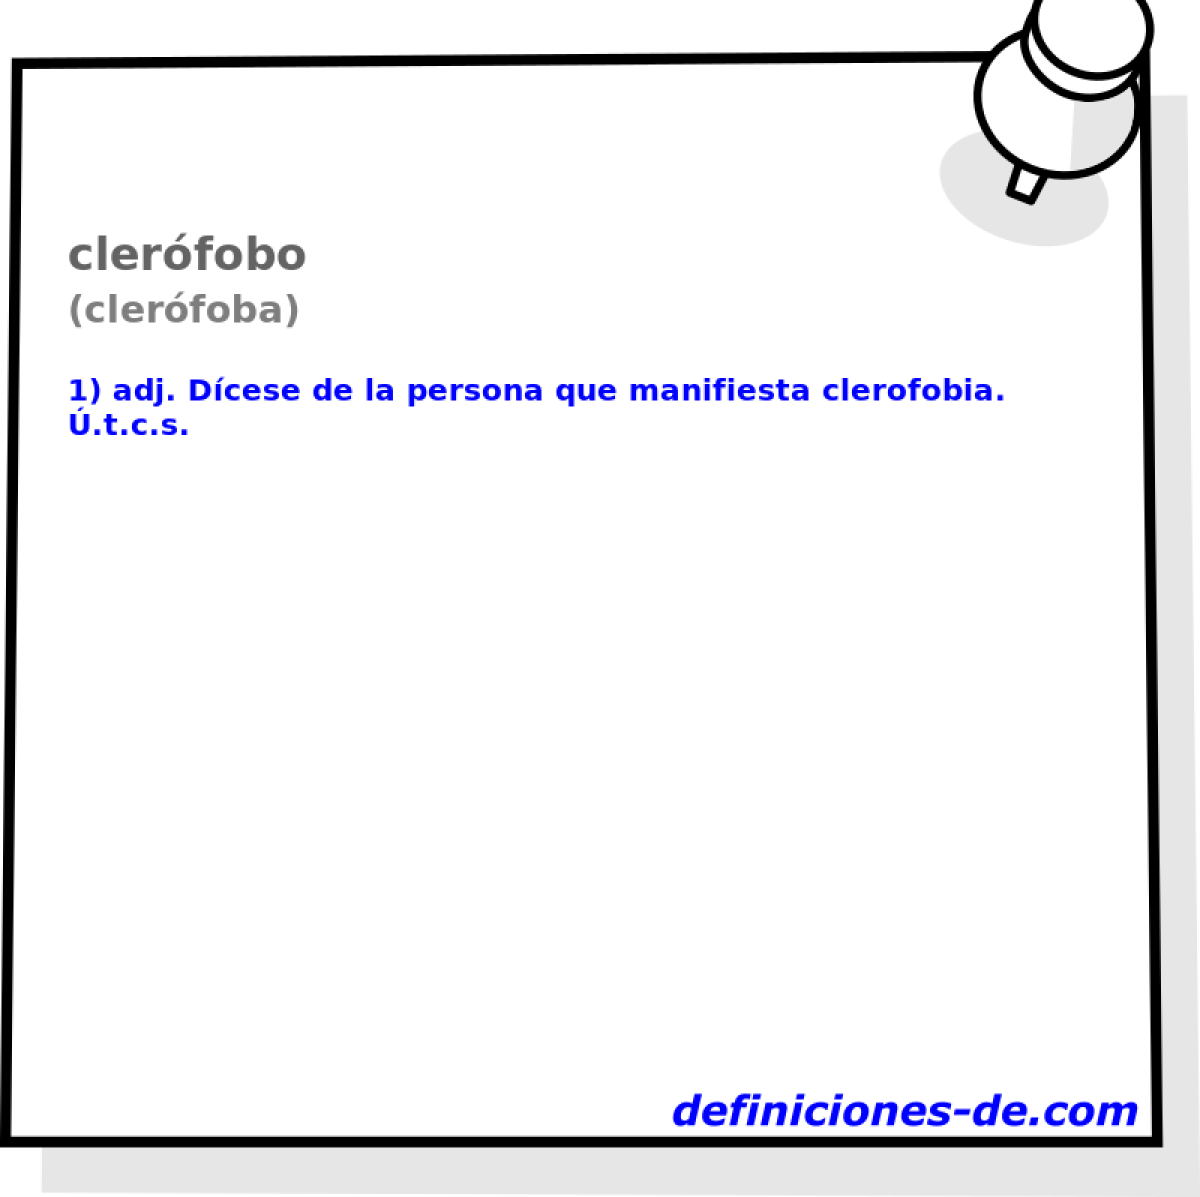 clerfobo (clerfoba)